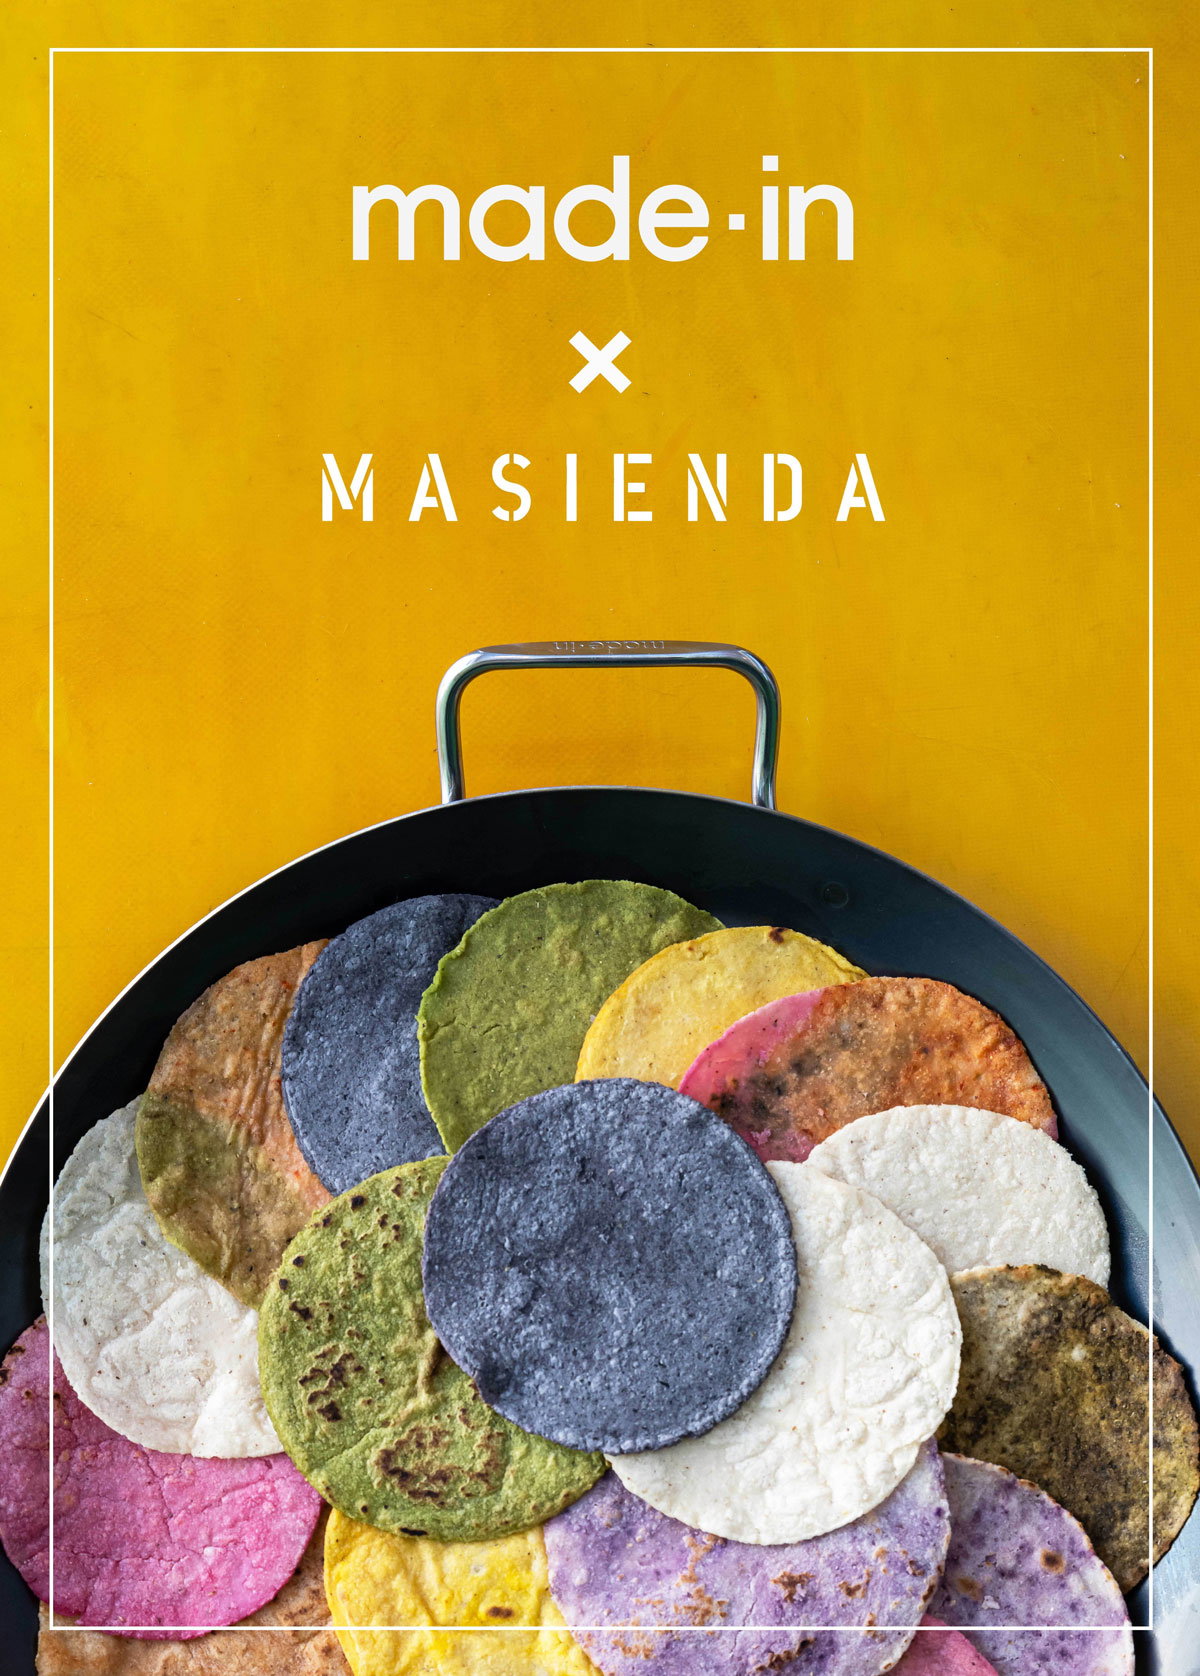 Comal by Made In x Masienda